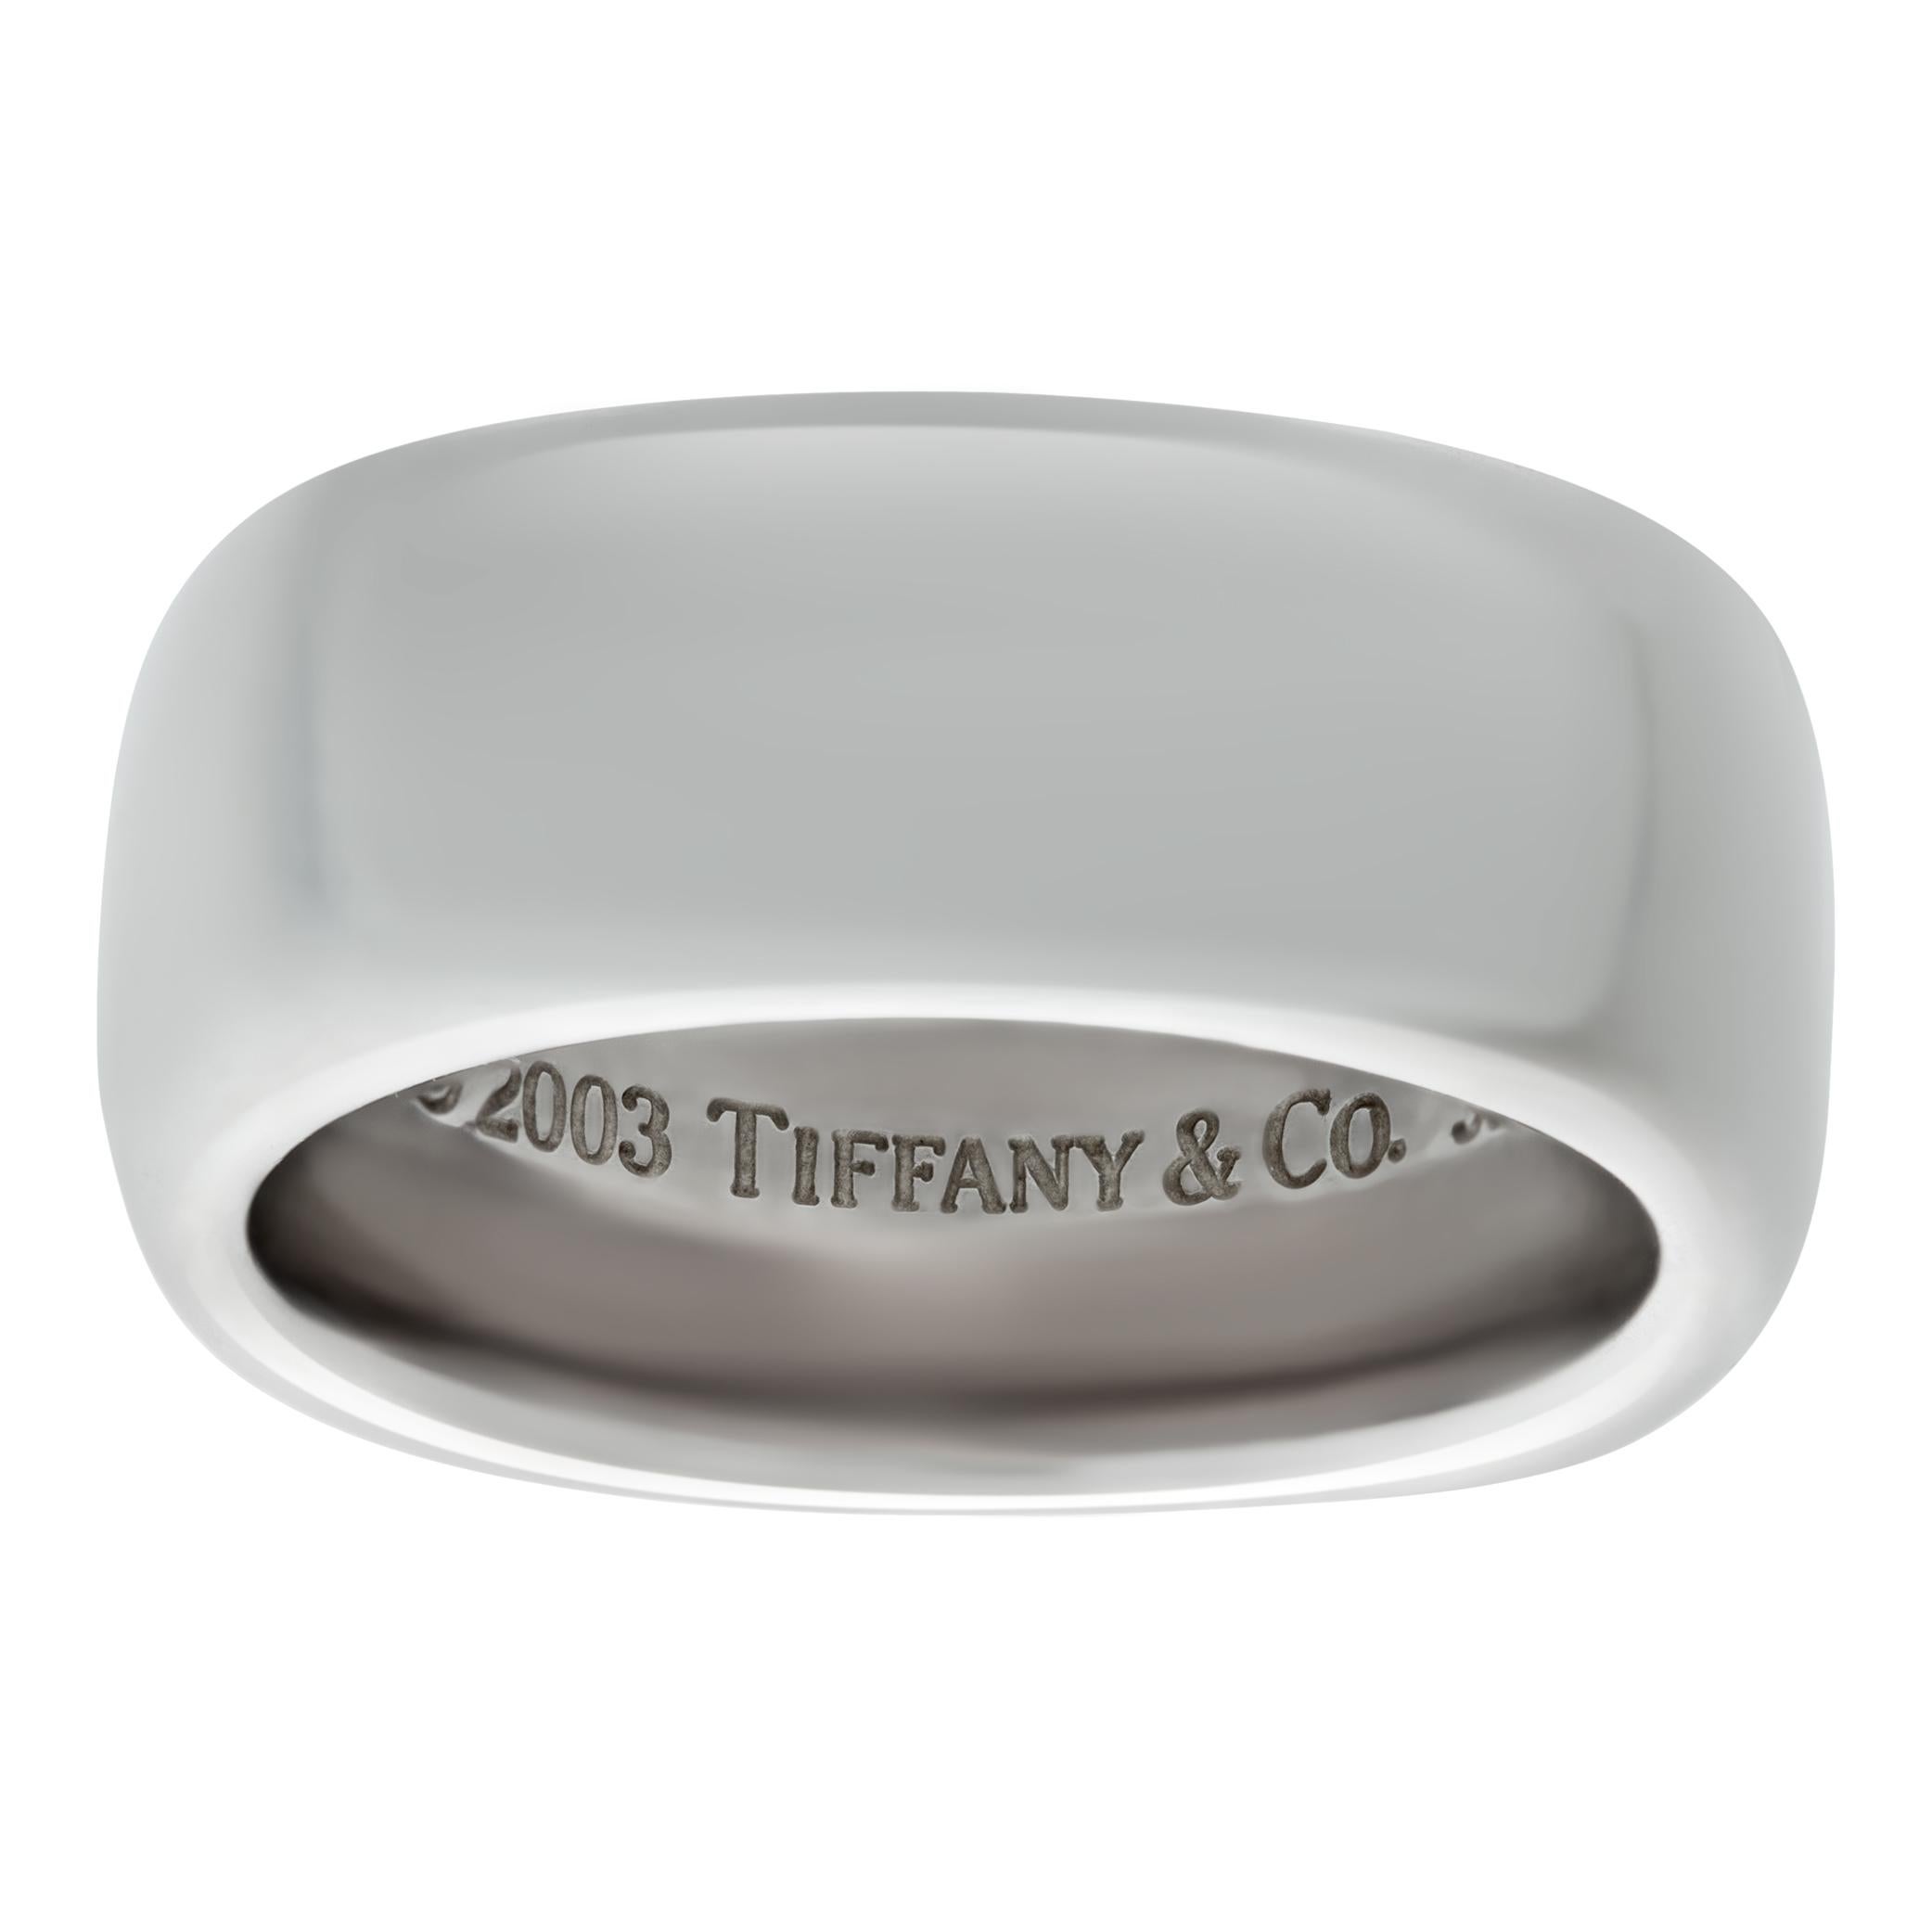 Tiffany & Co. 2003 sterling silver band ring For Sale